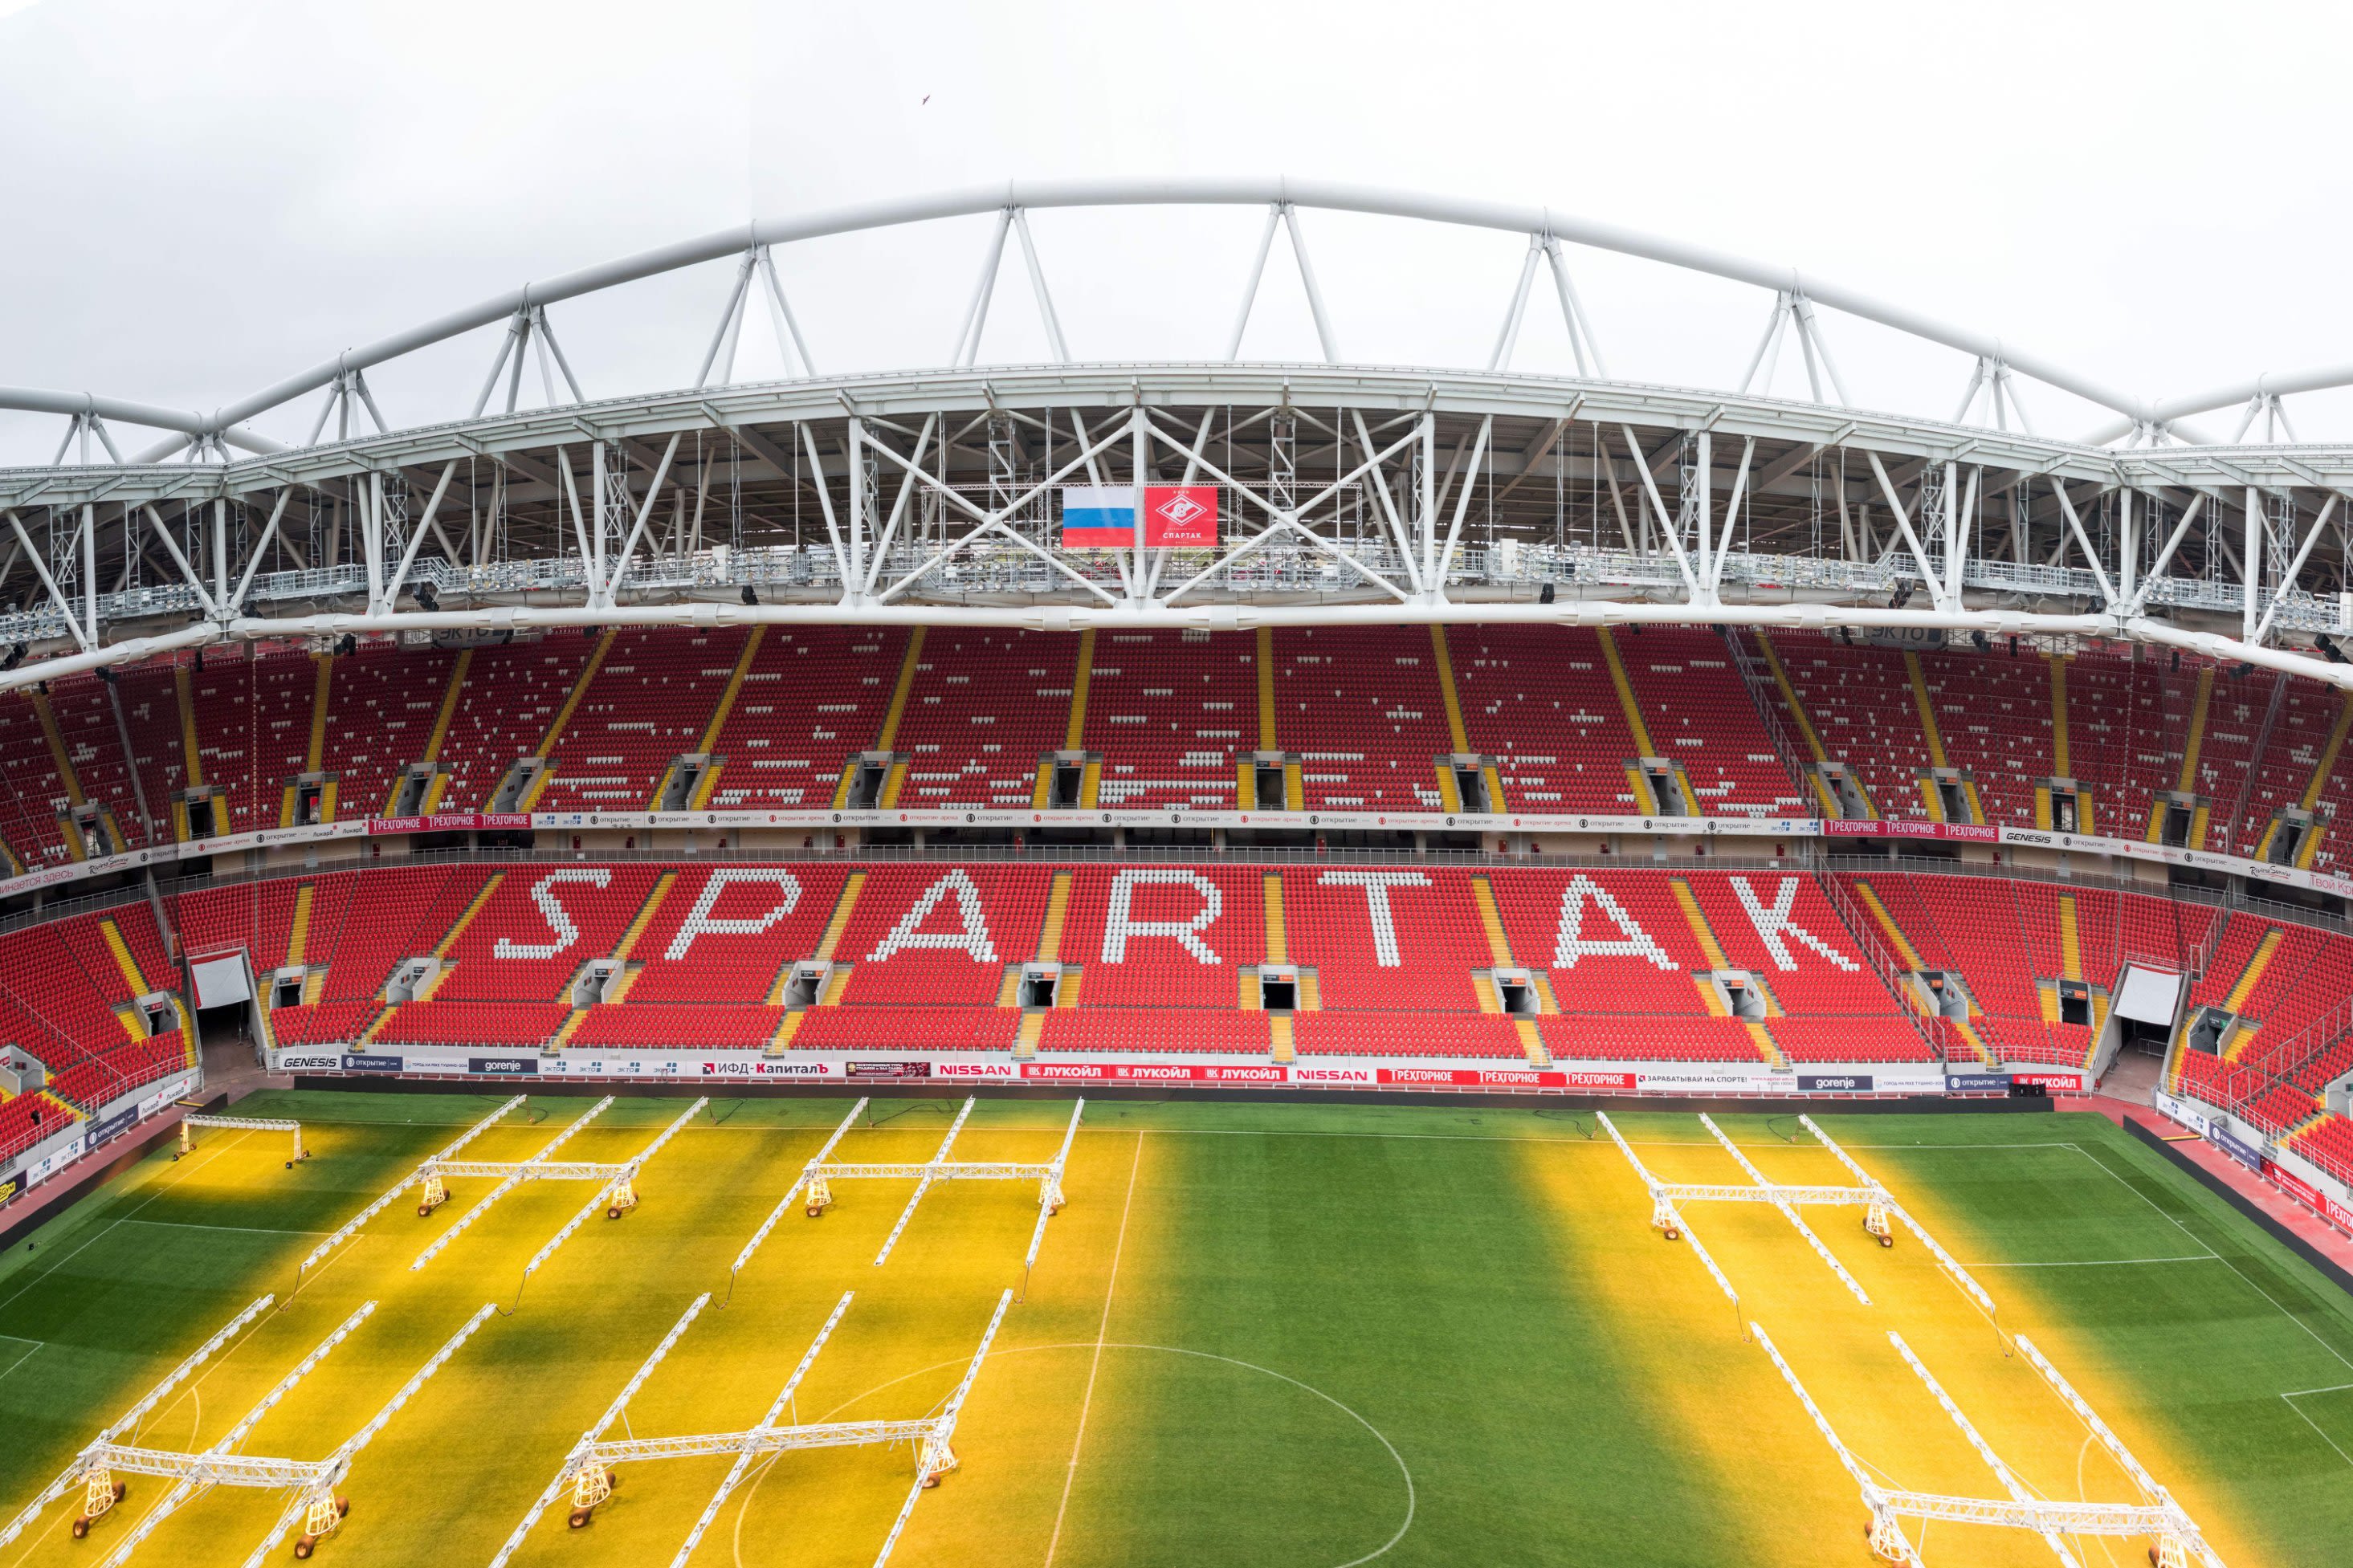 FIFA World Cup - Welcome to Spartak Stadium! The home of